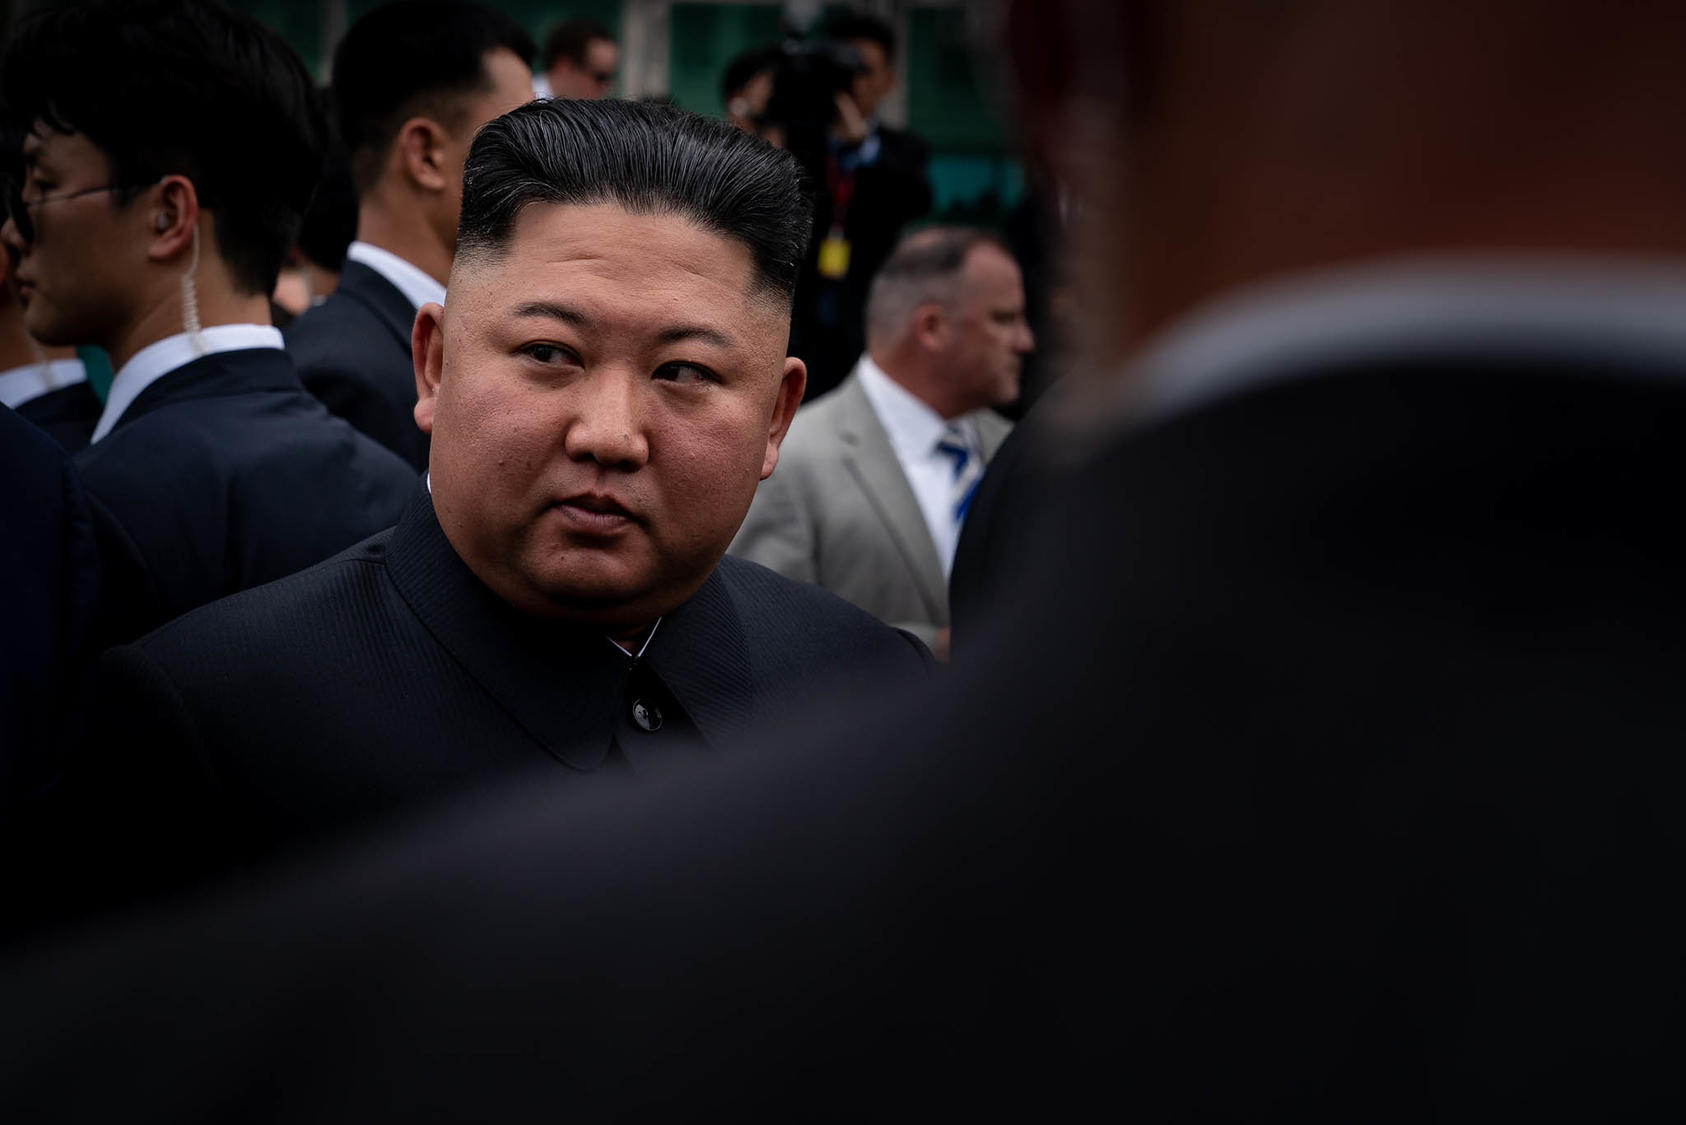 North Korean leader Kim Jong Un at the truce village of Panmunjom in the Demilitarized Zone on June 30, 2019. (Erin Schaff/The New York Times)